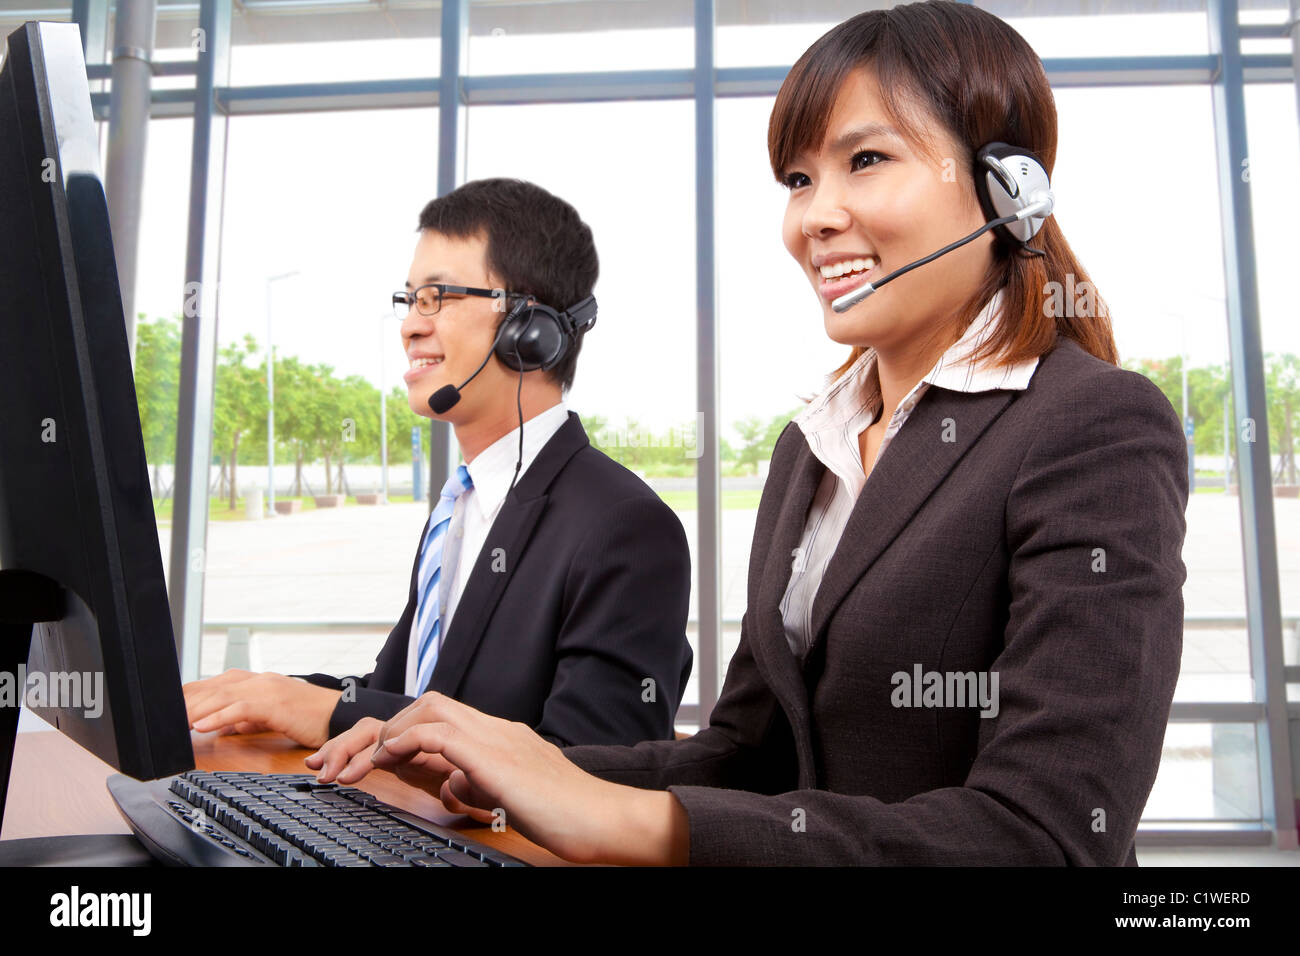 Smiling customer service representative in modern office with a headset Stock Photo